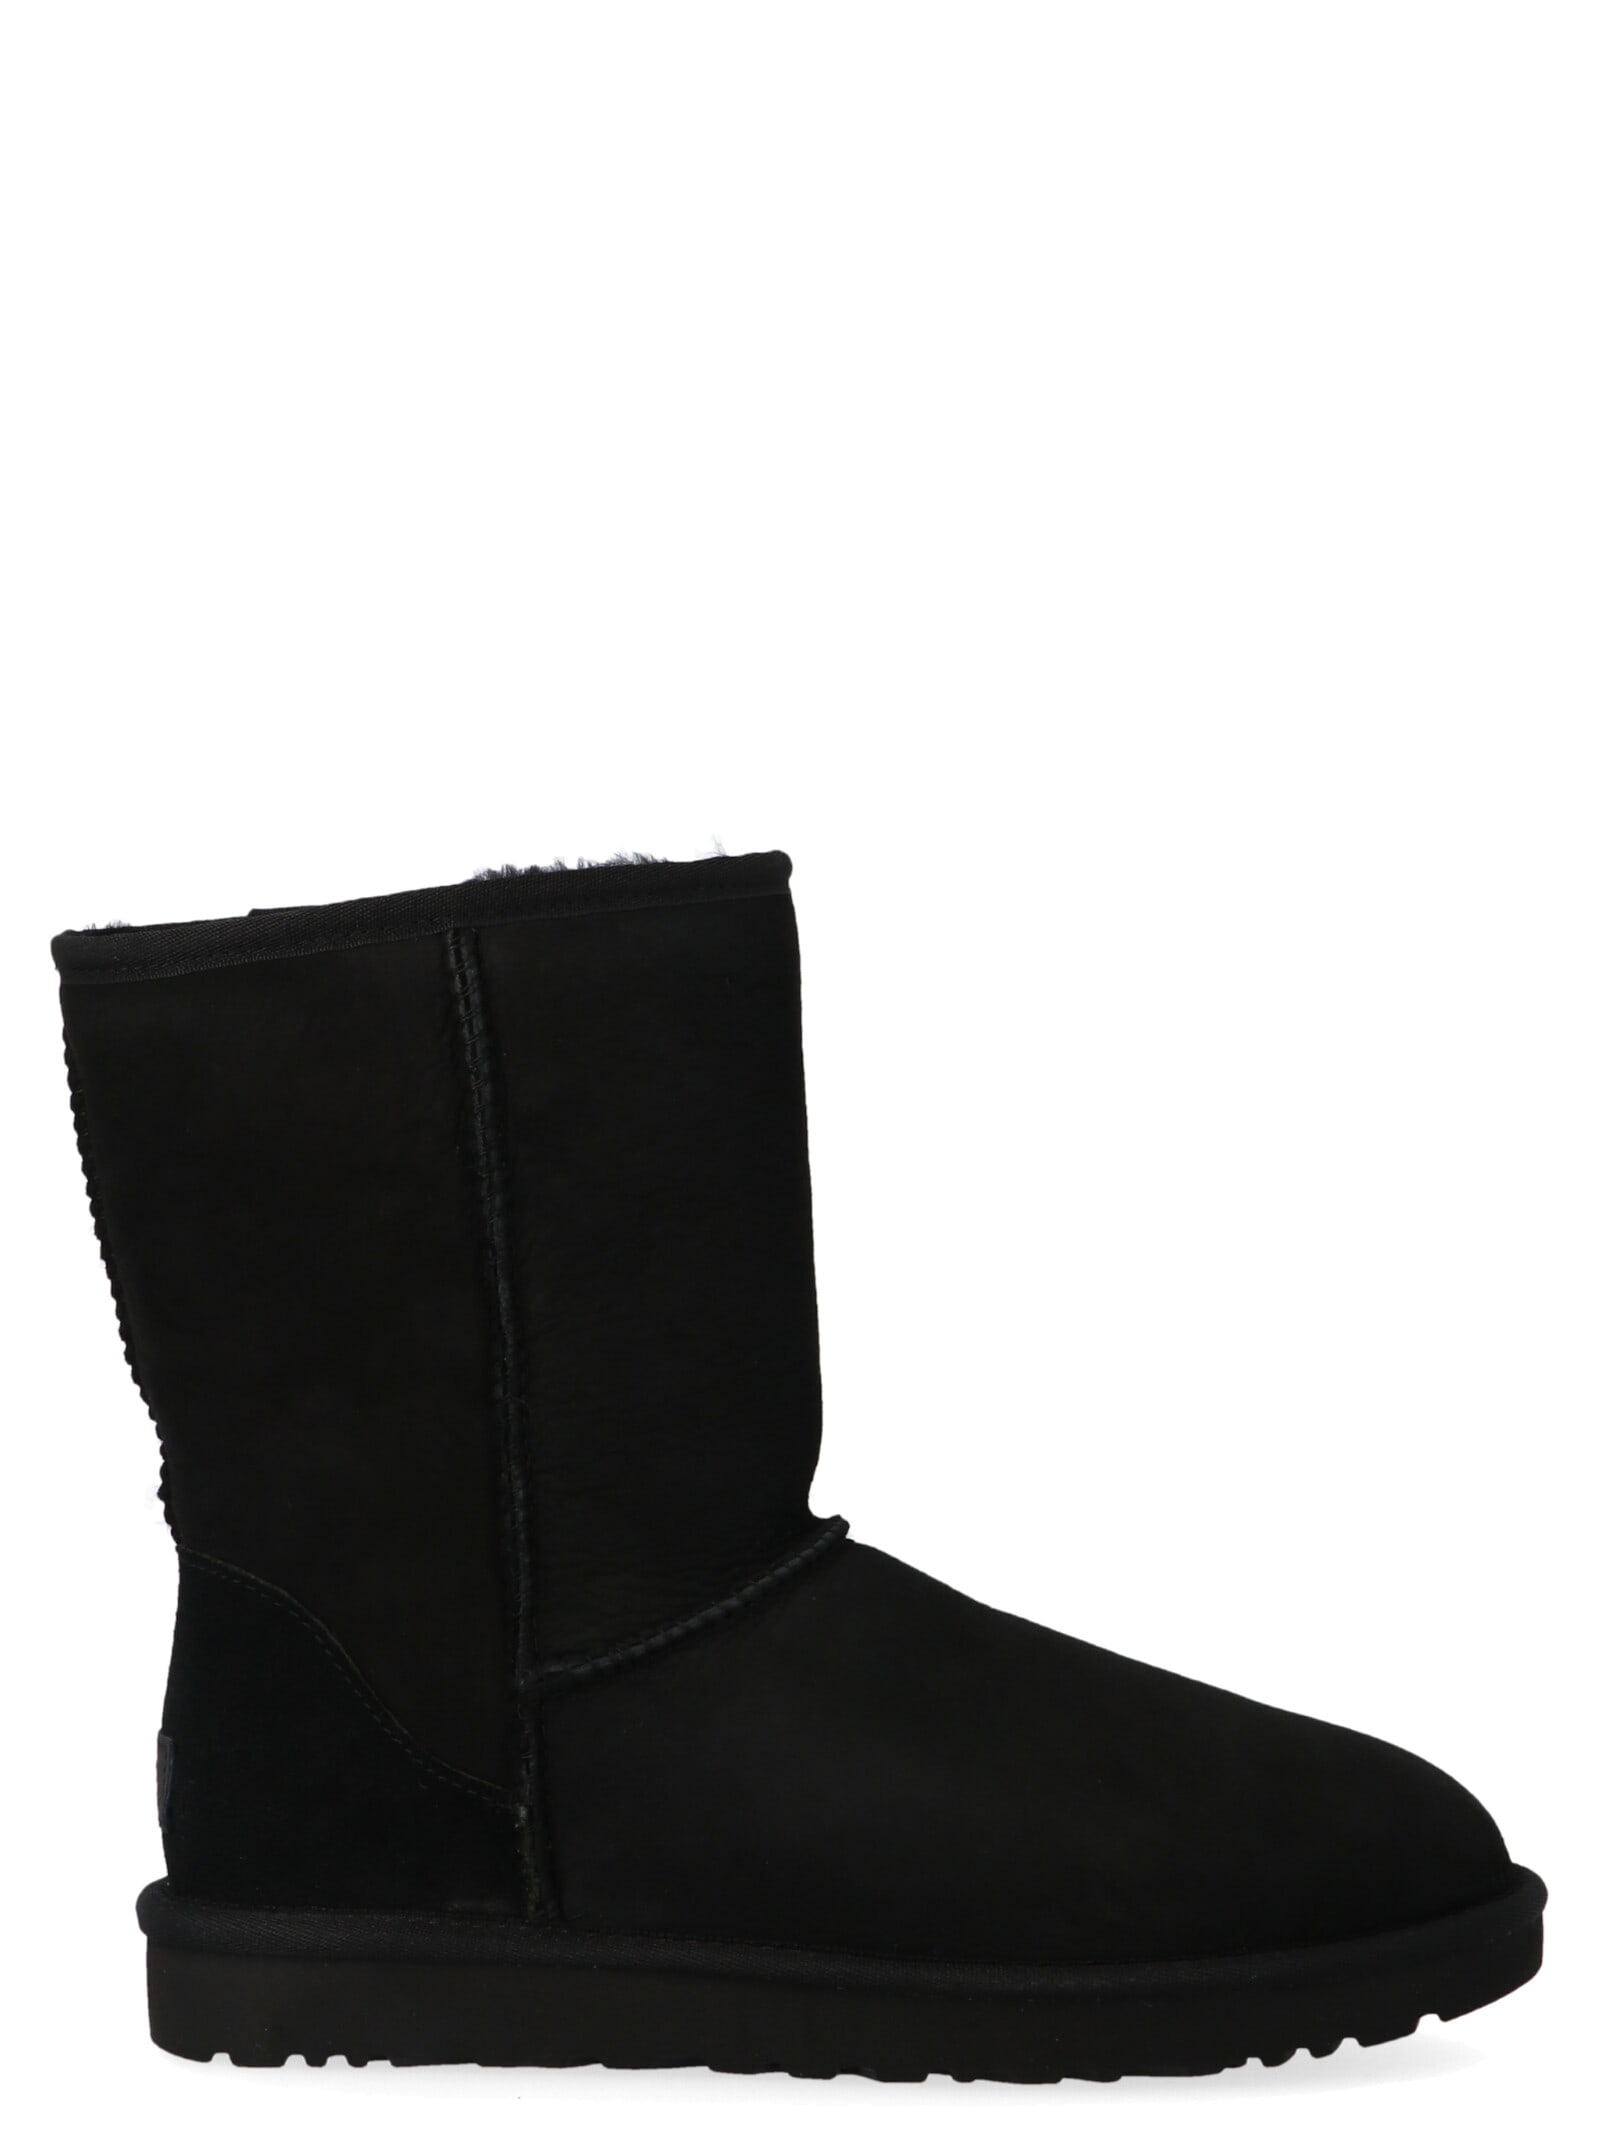 ugg leather boots sale